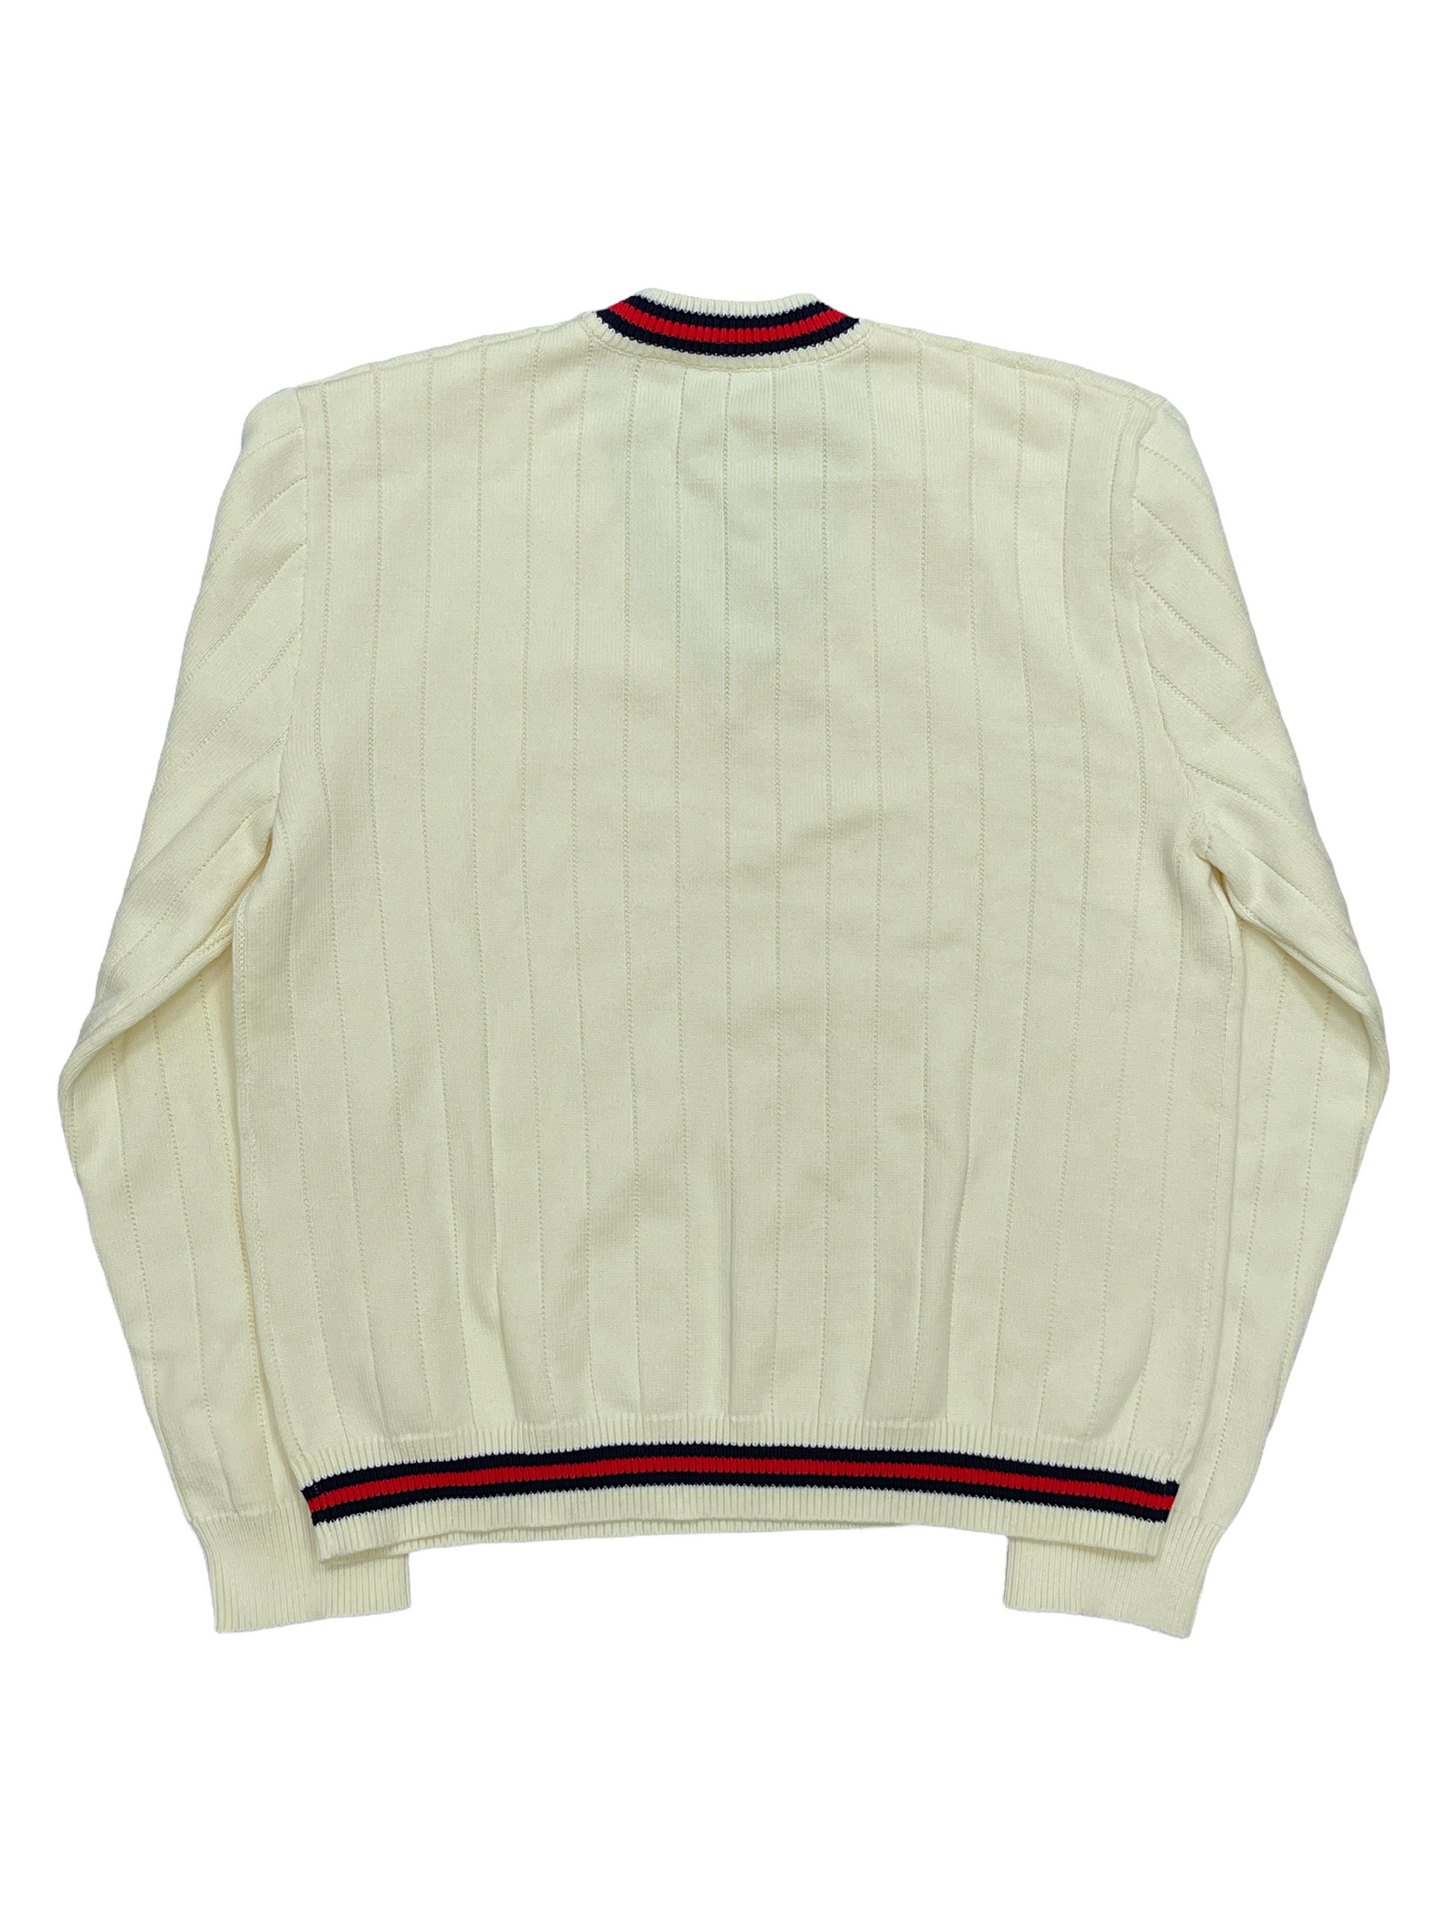 Gucci Cream Cotton Knit Cardigan Large  — Genuine Design Luxury Consignment Calgary, Canada New & Pre-Owned Authentic Clothing, Shoes, Accessories.